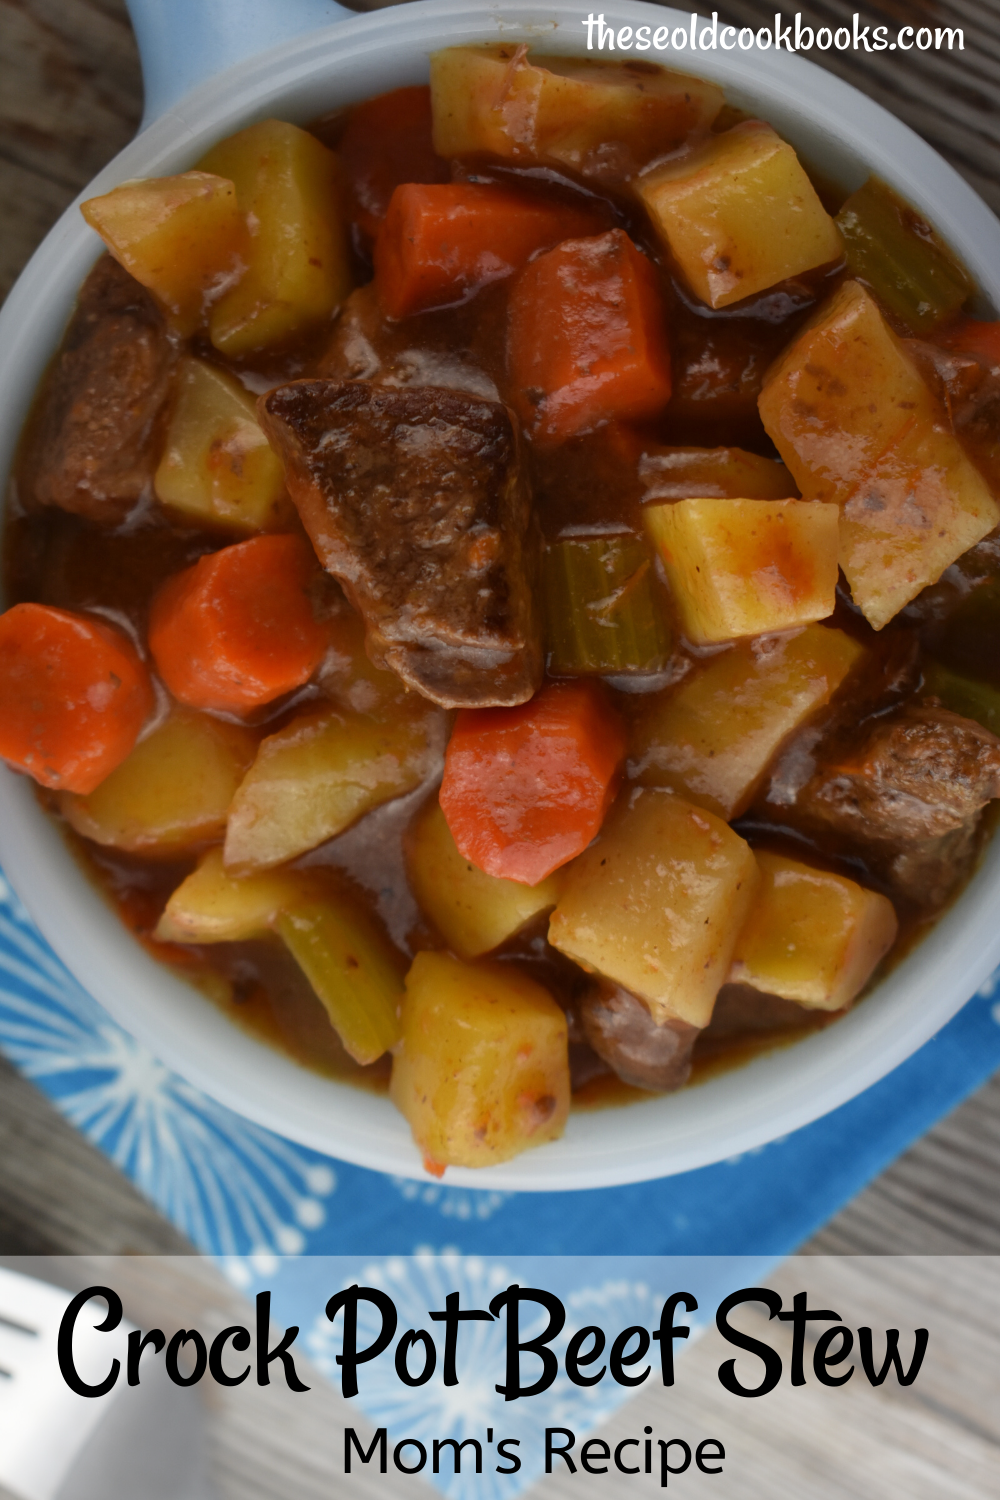 Mom’s Crock Pot Beef Stew – Old Fashioned Beef Stew Recipe